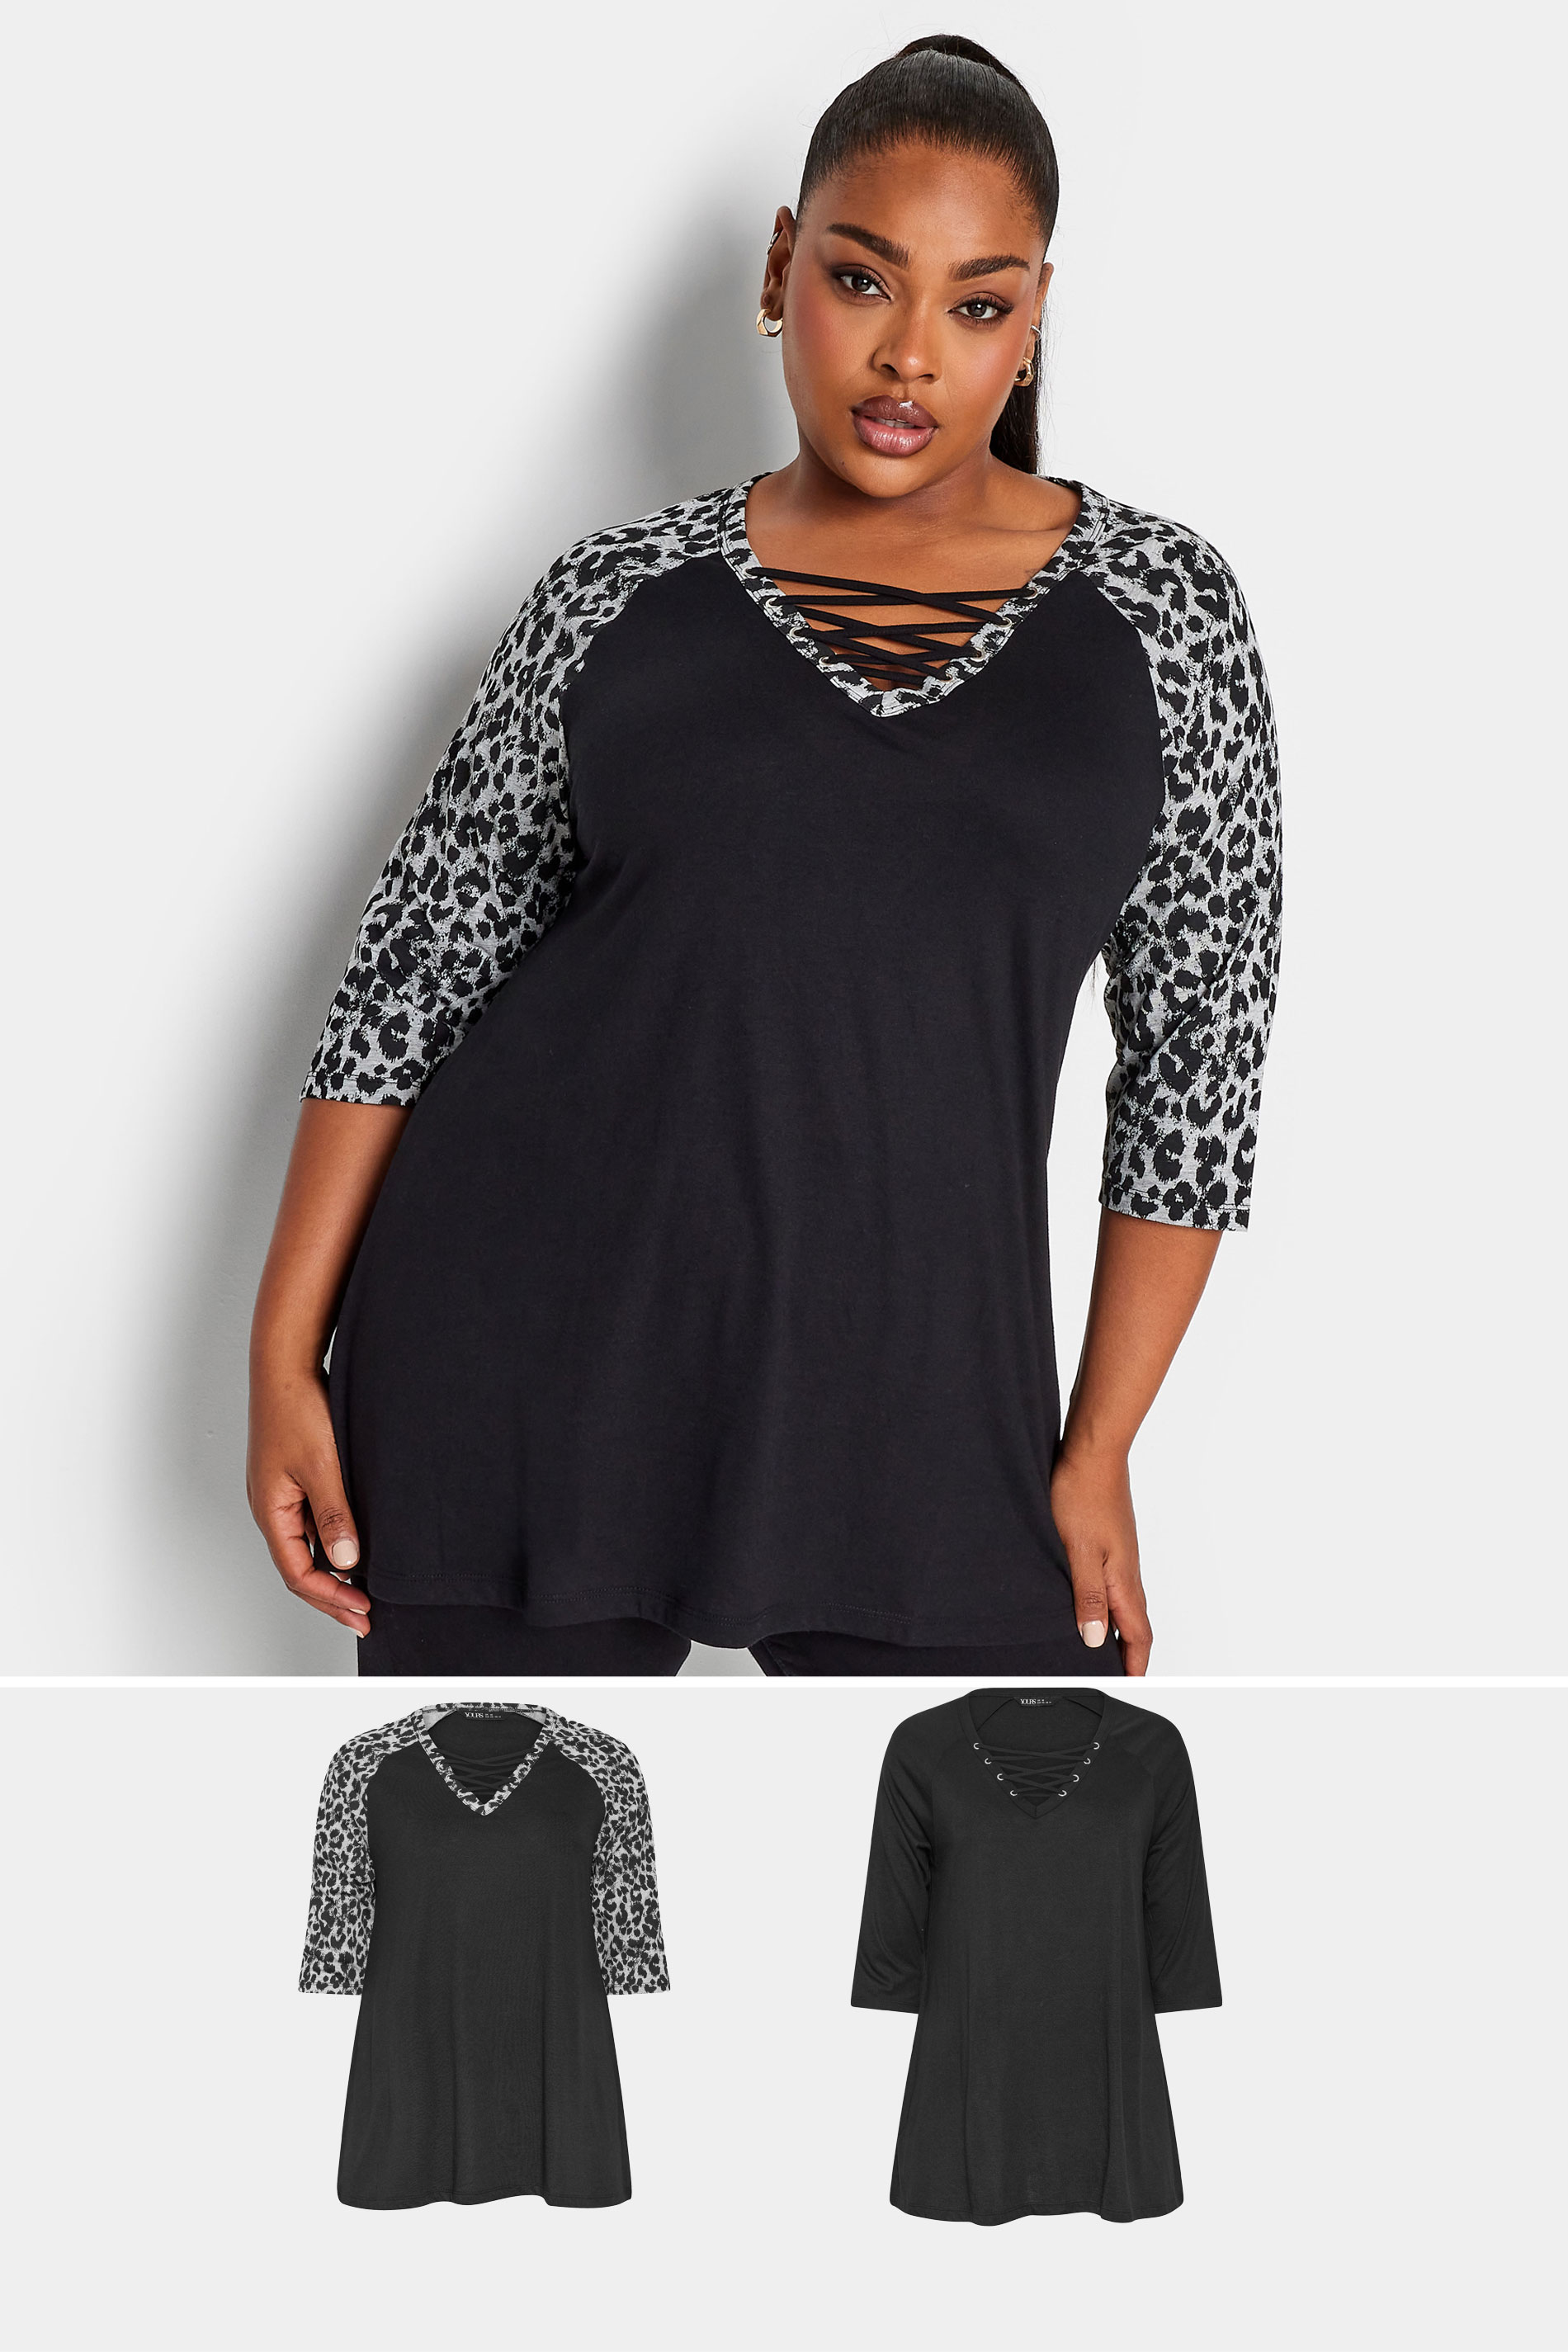 YOURS Plus Size 2 PACK Black Animal Print Lace Up Eyelet Tops | Yours Clothing 1